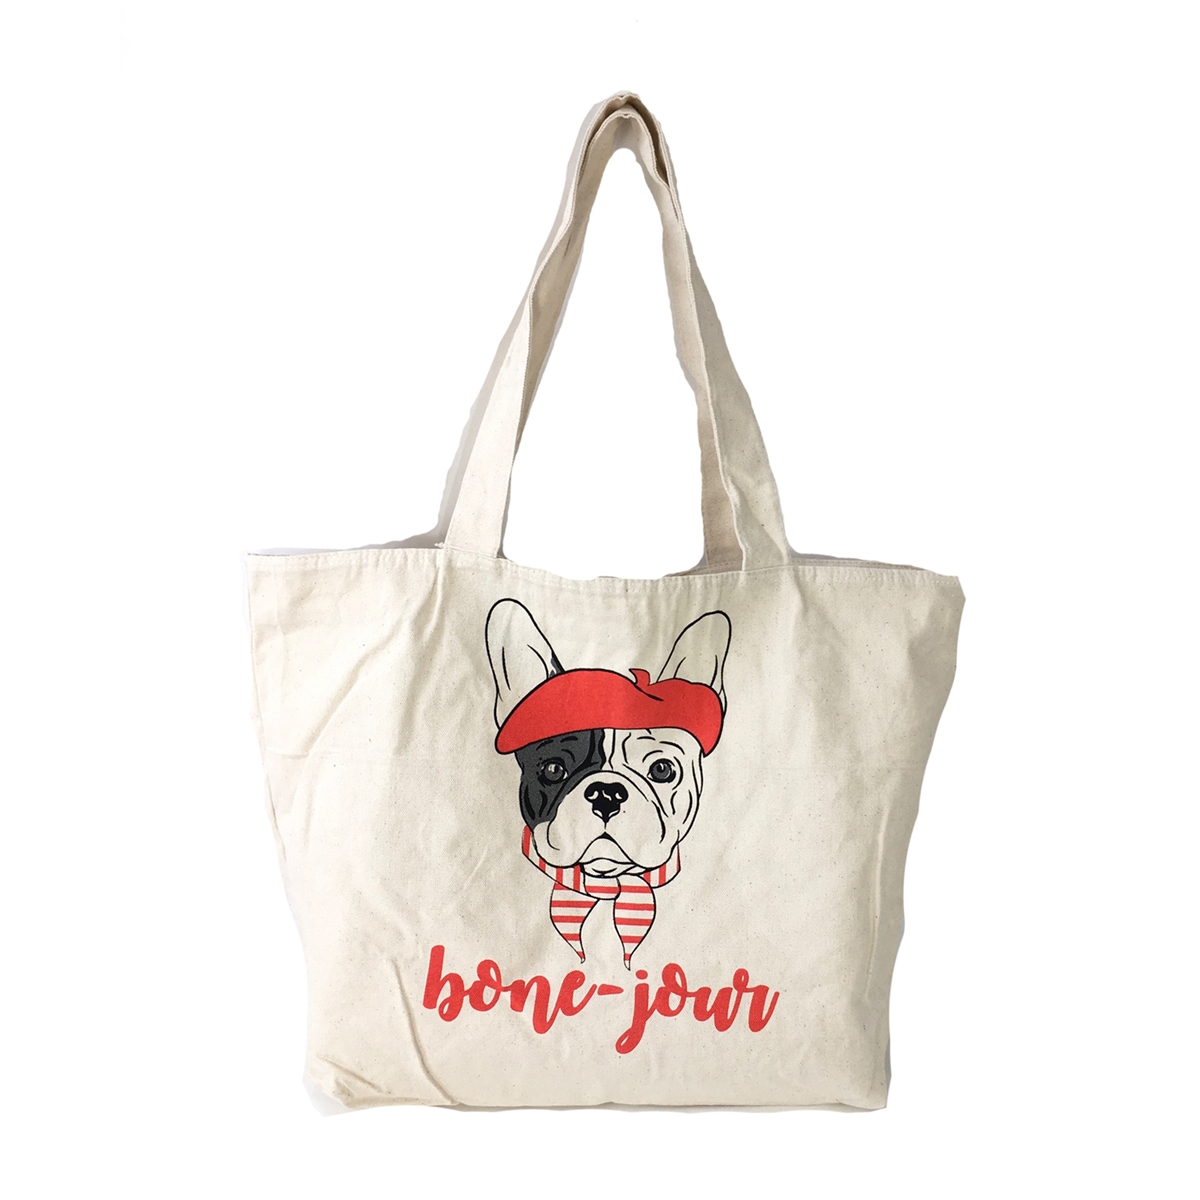 French minority Faure Le page tote bag shopping bag dog tooth